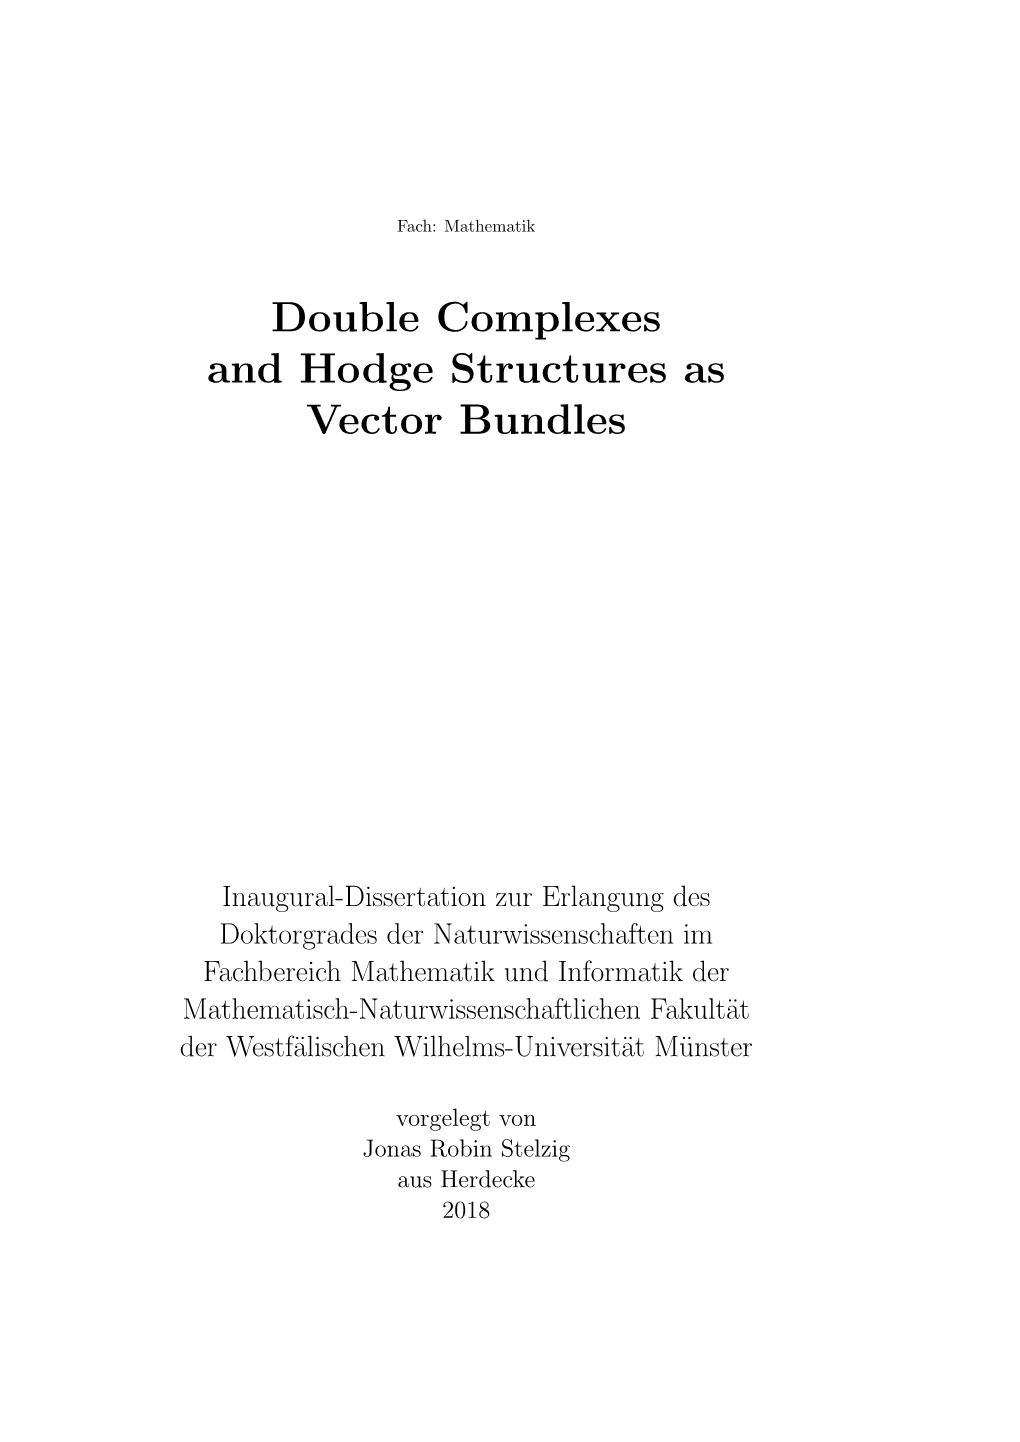 Double Complexes and Hodge Structures As Vector Bundles